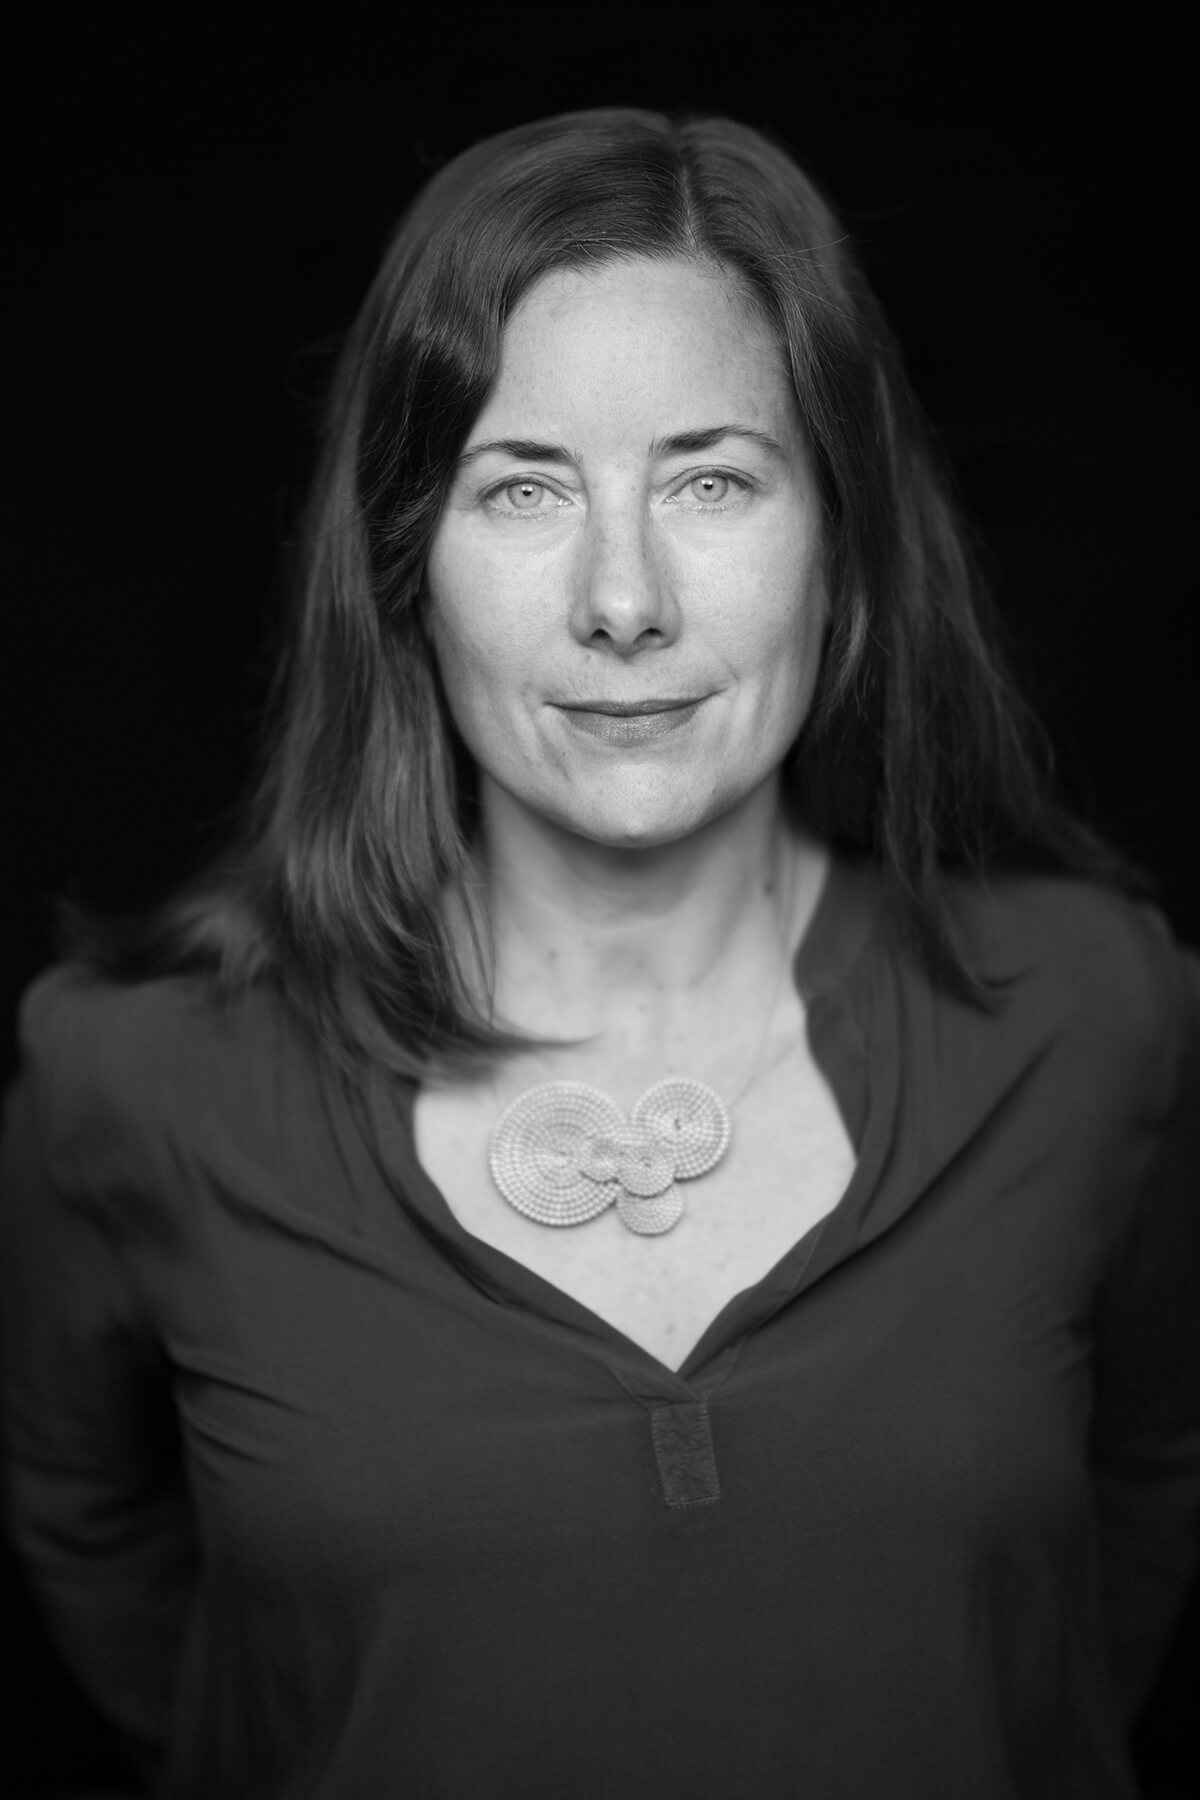 Jennifer Redfearn looking straight at the camera. She has shoulder-length hair and is wearing a necklace and black button-down shirt. Portrait in black and white.